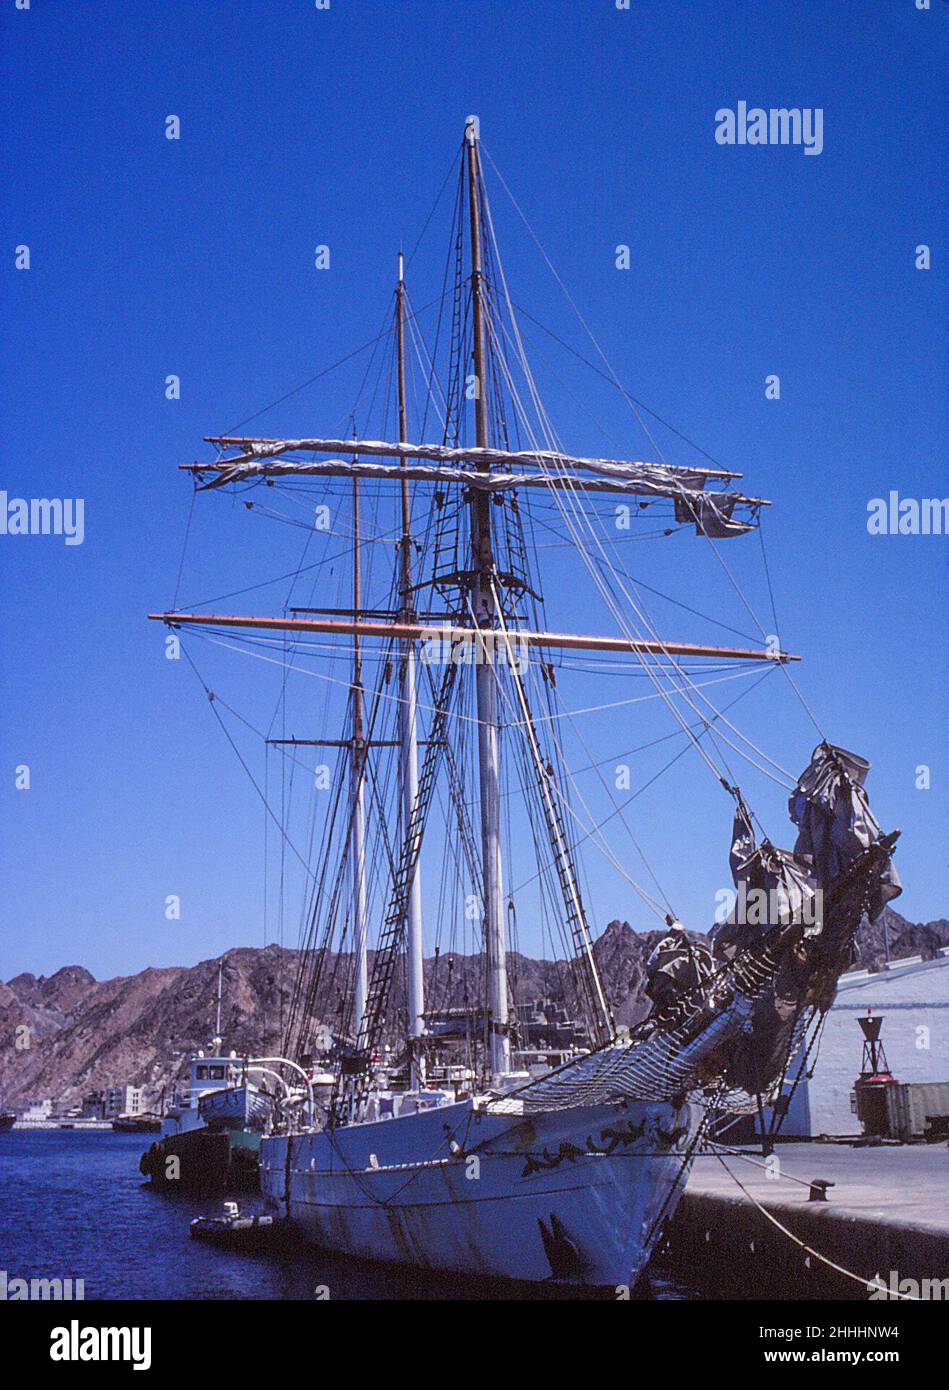 Schooner built in Scotland, originally 'Captain Scott'. Sold to Oman in 1977 and renamed 'Shabab Oman'. In Muscat, May 1978 Stock Photo